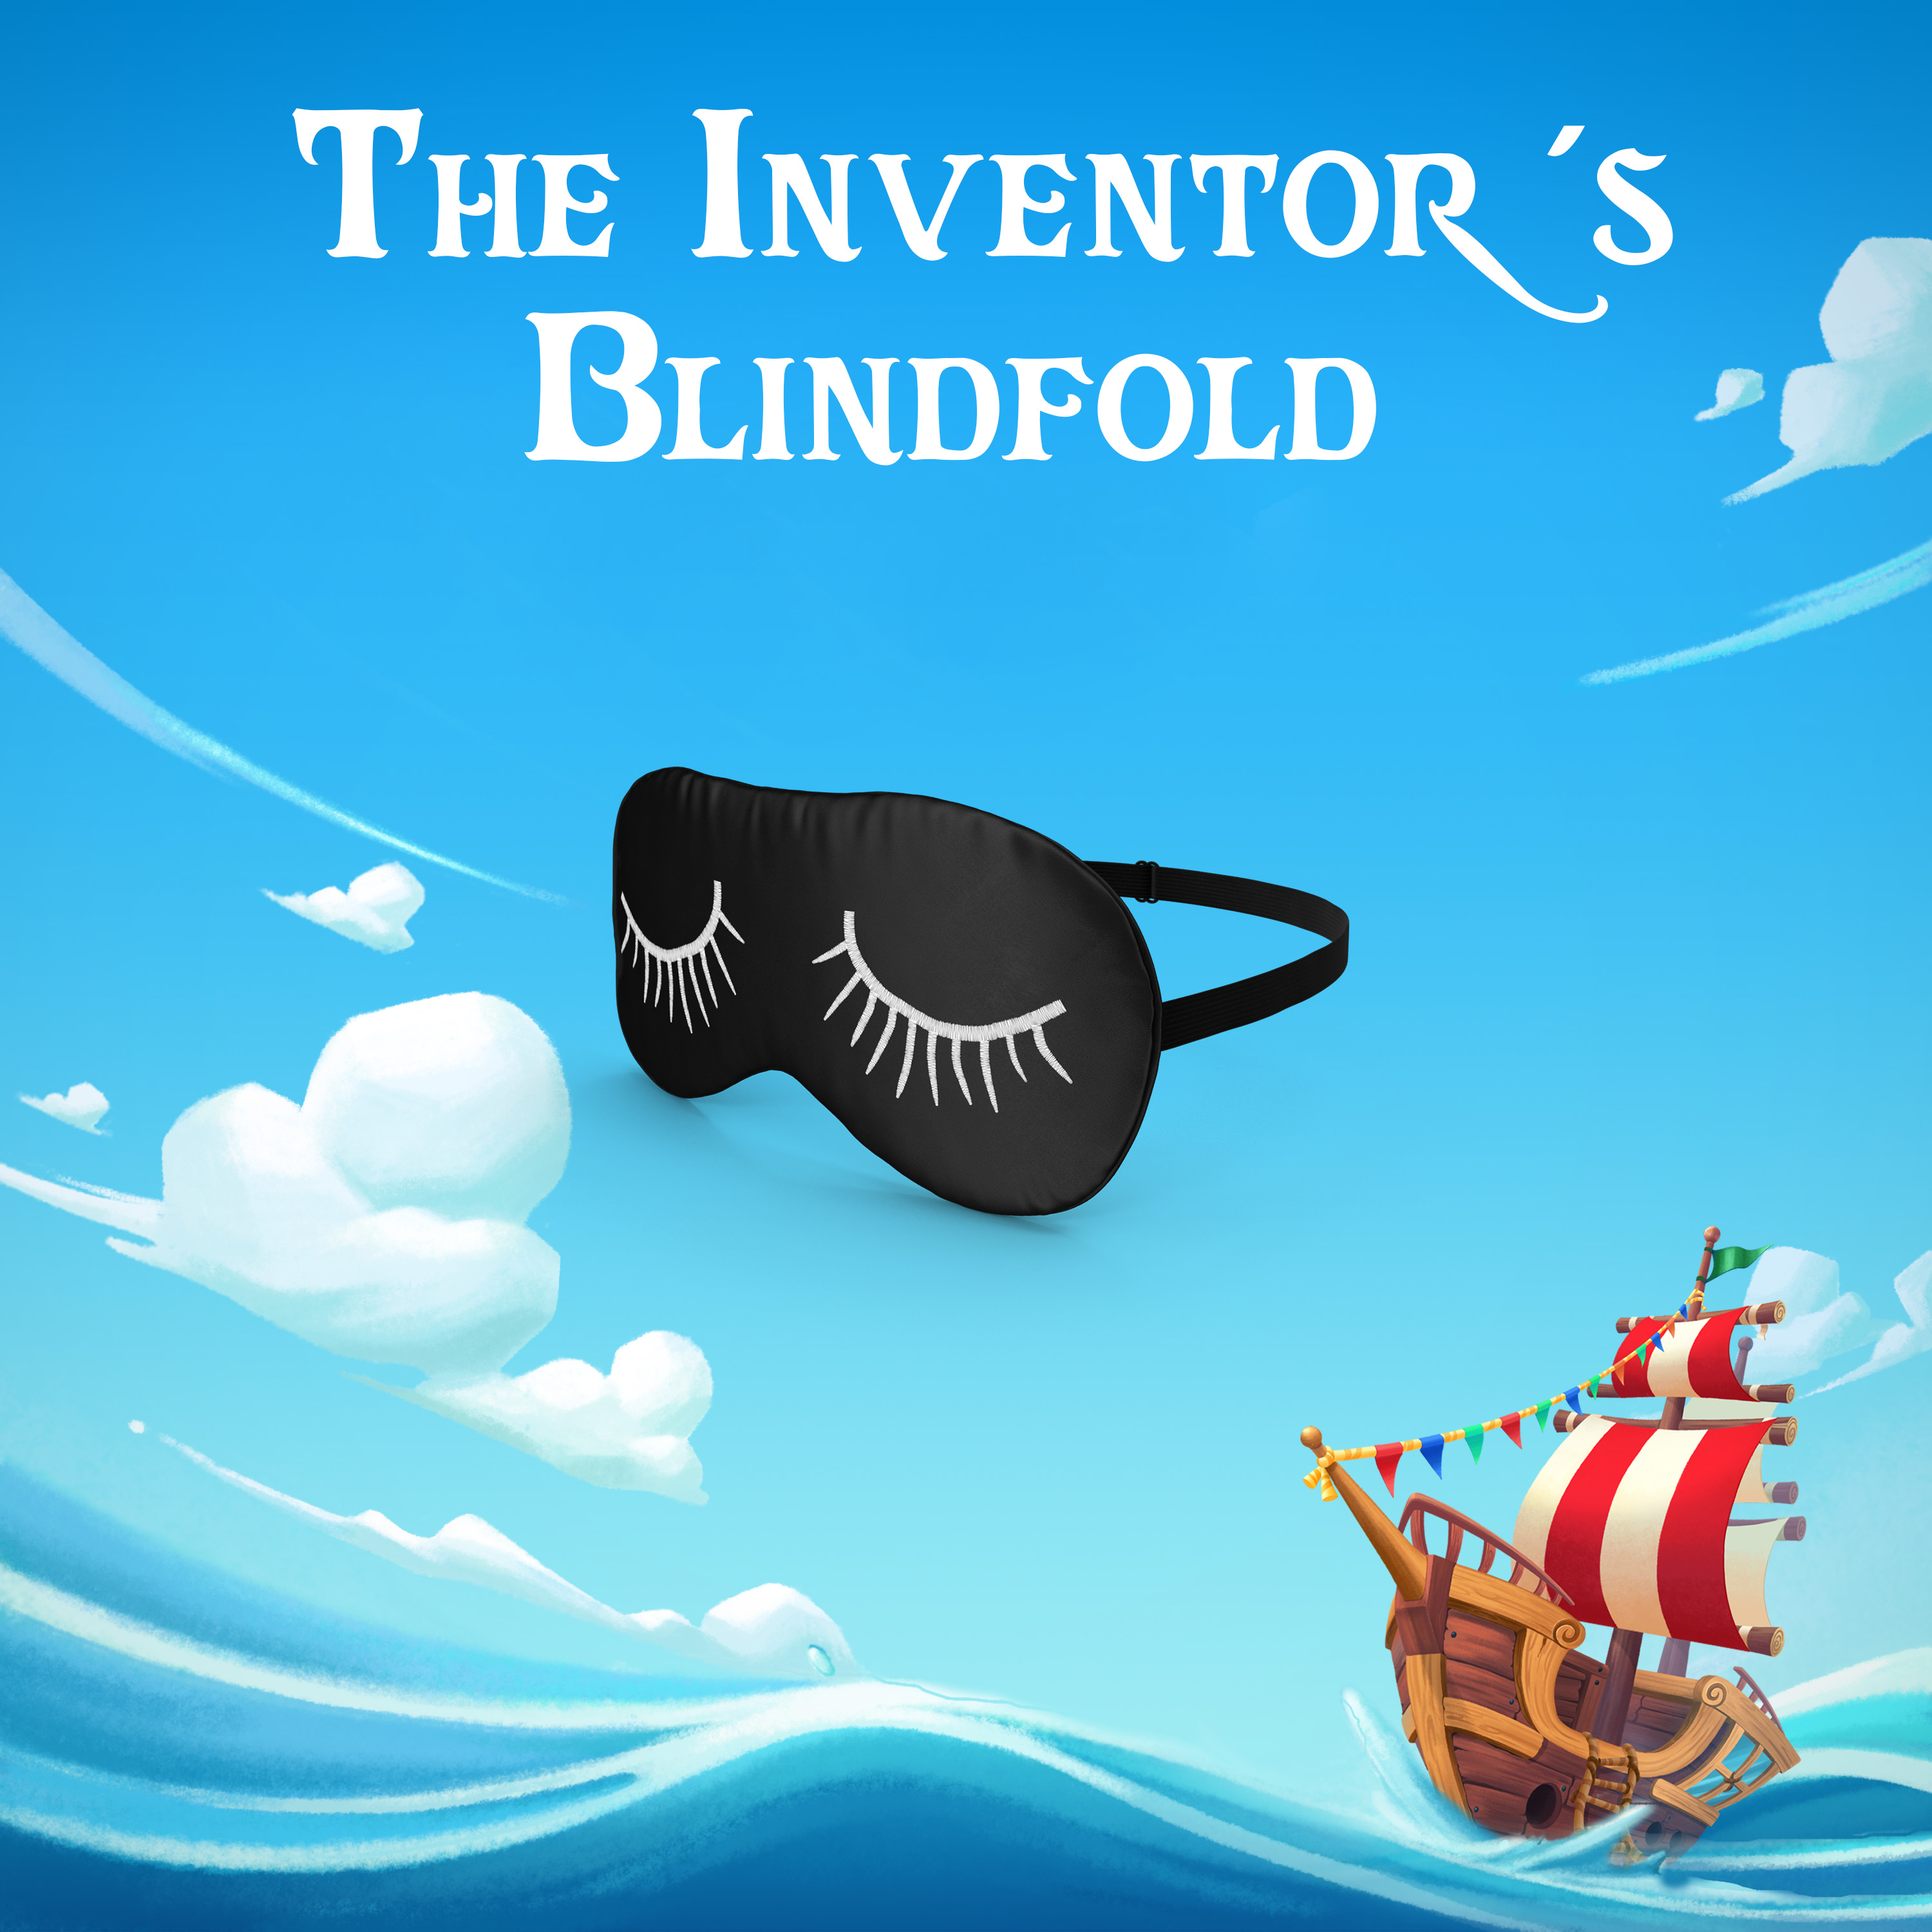 The Inventor’s Blindfold